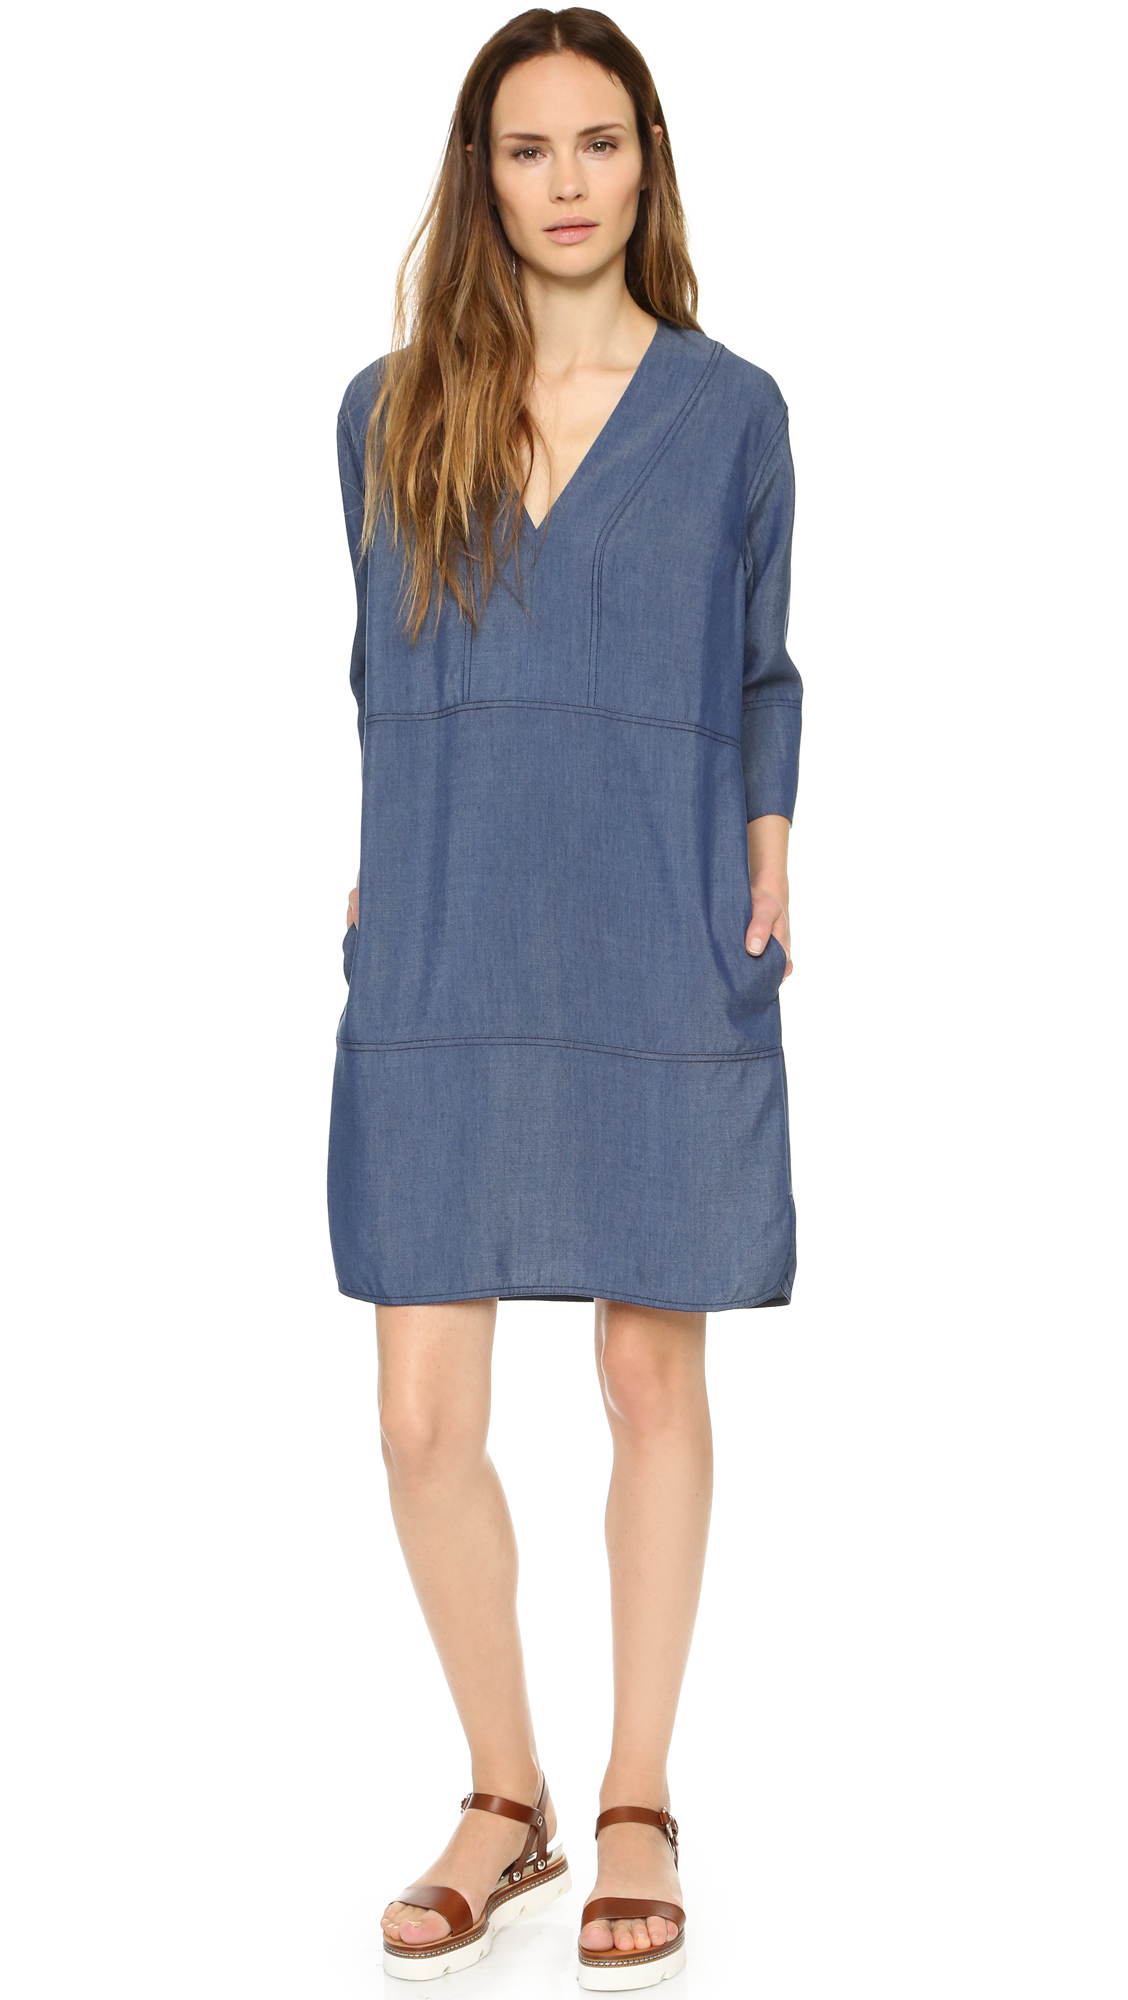 Lyst - Vince Chambray Shift Dress in Blue